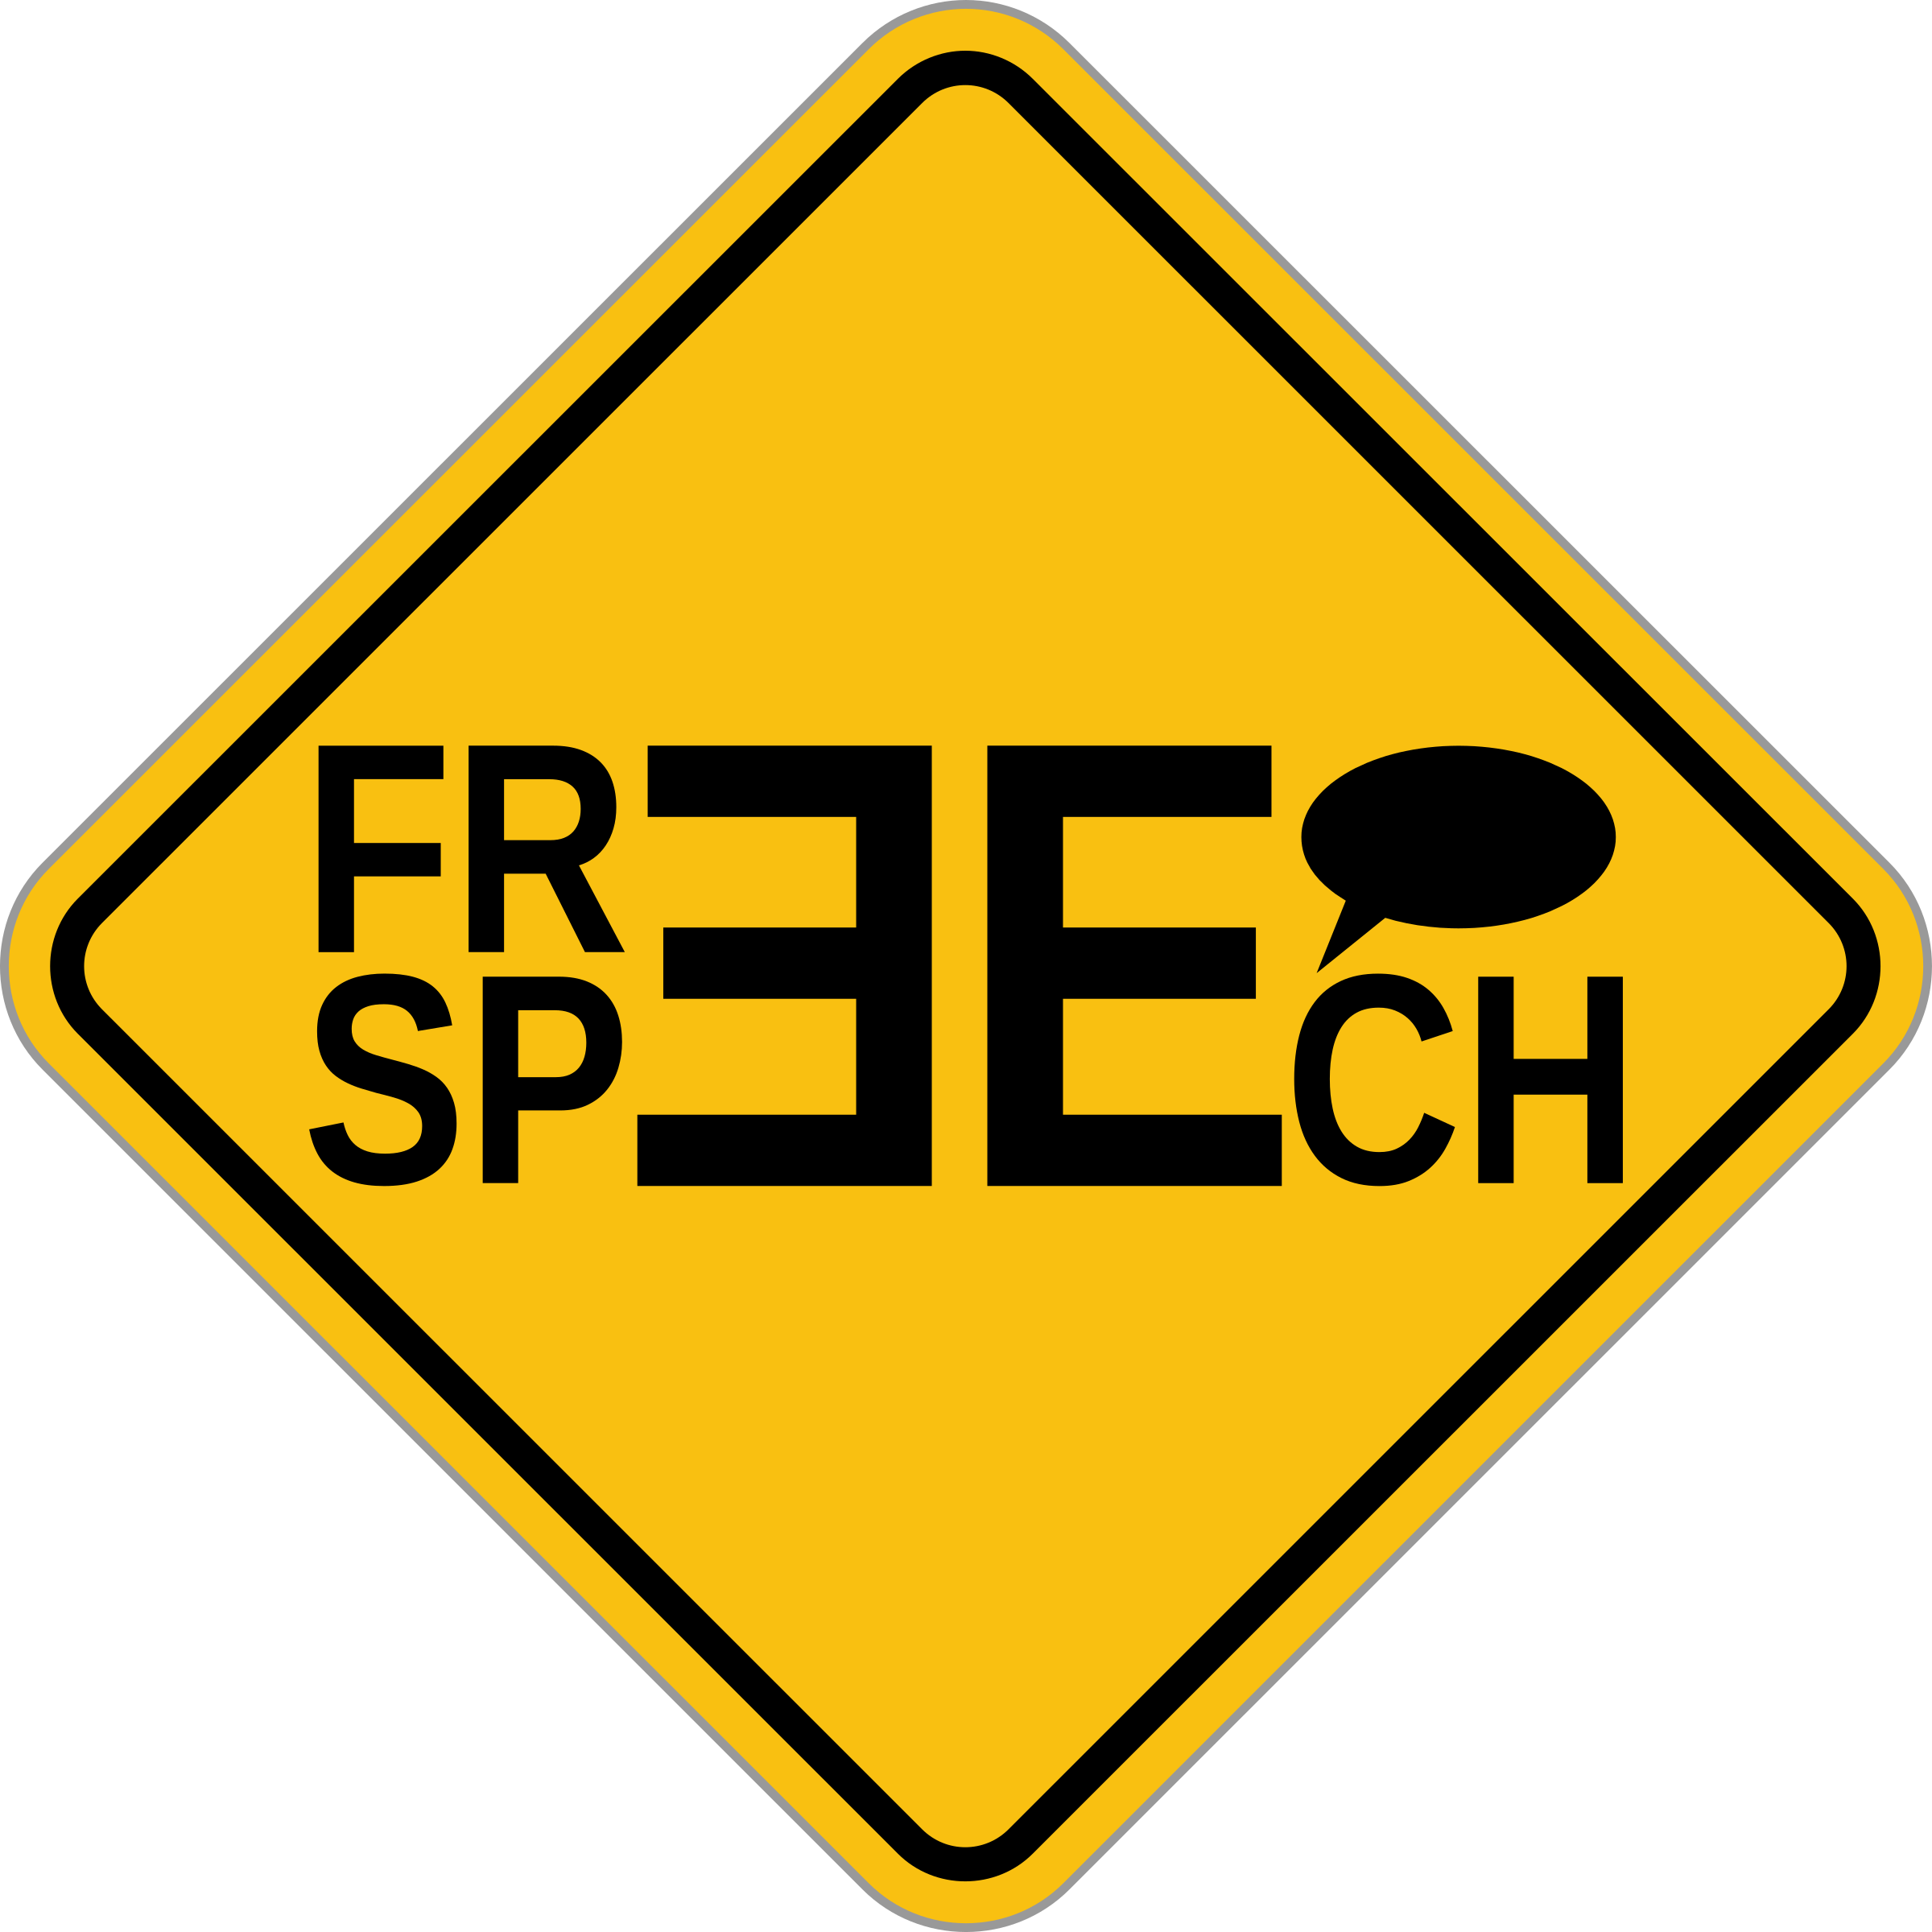 Freedom Of Speech Png Hd - Big Image (Png), Transparent background PNG HD thumbnail